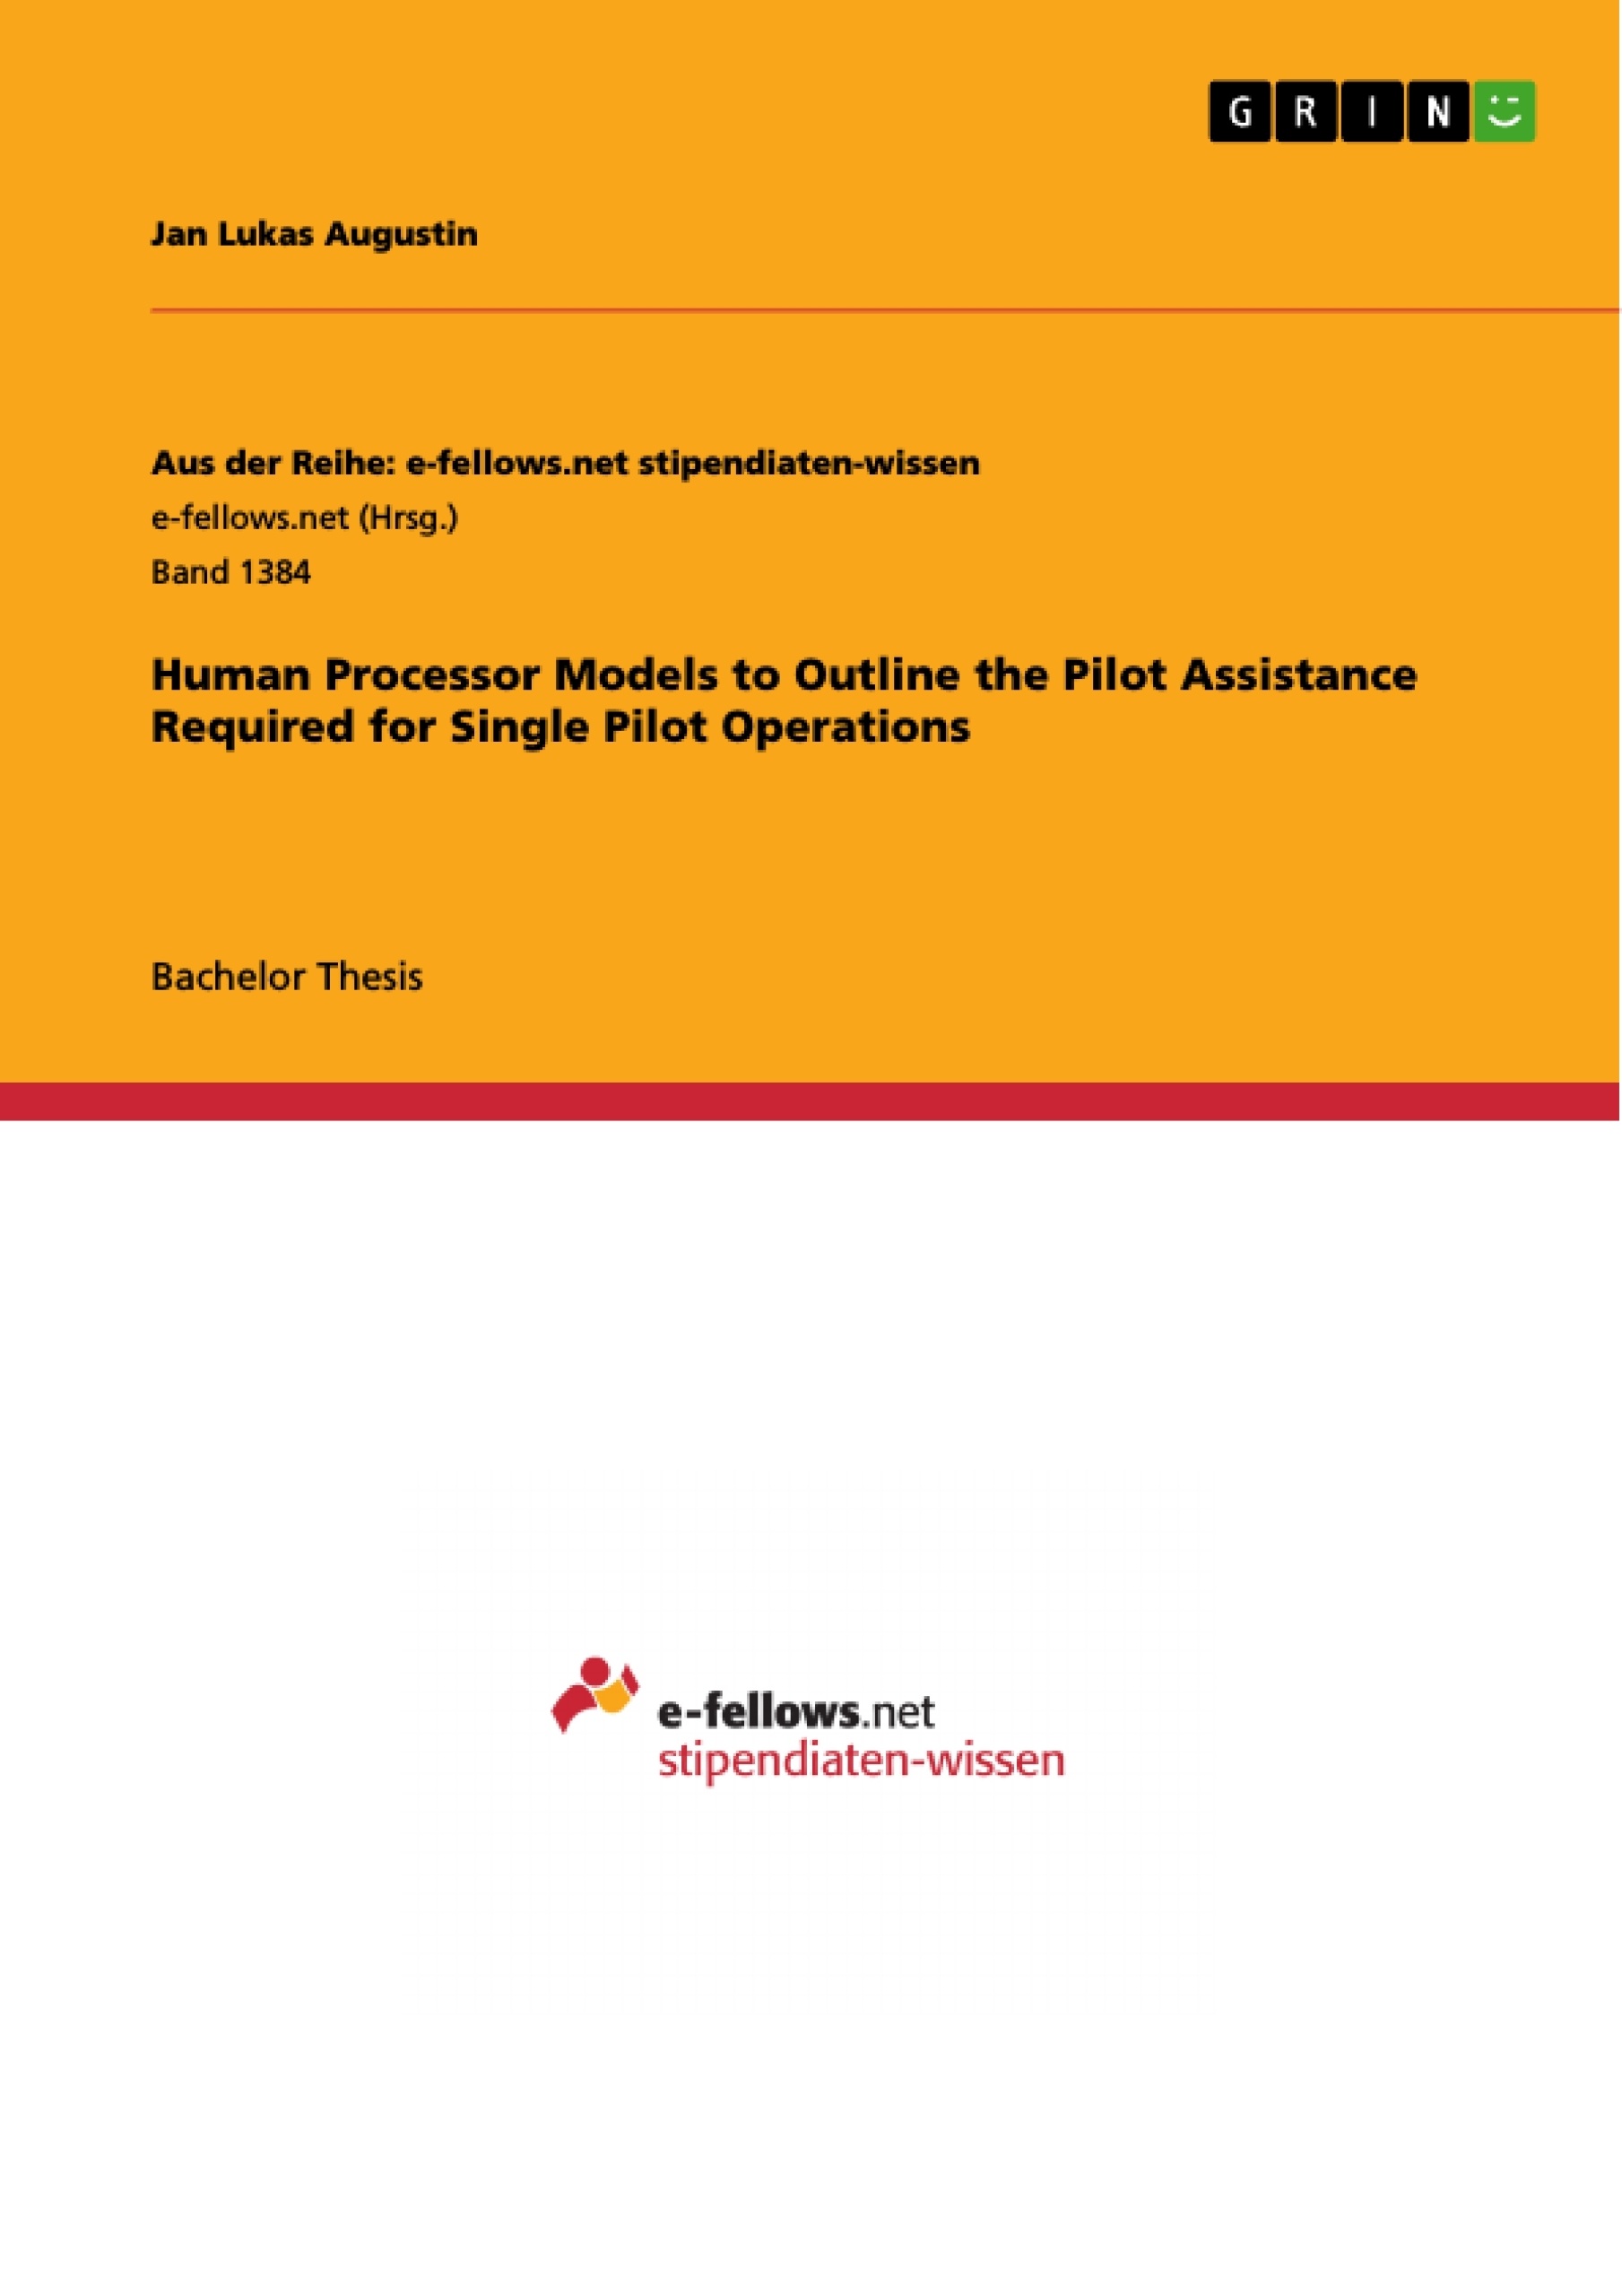 Title: Human Processor Models to Outline the Pilot Assistance Required for Single Pilot Operations